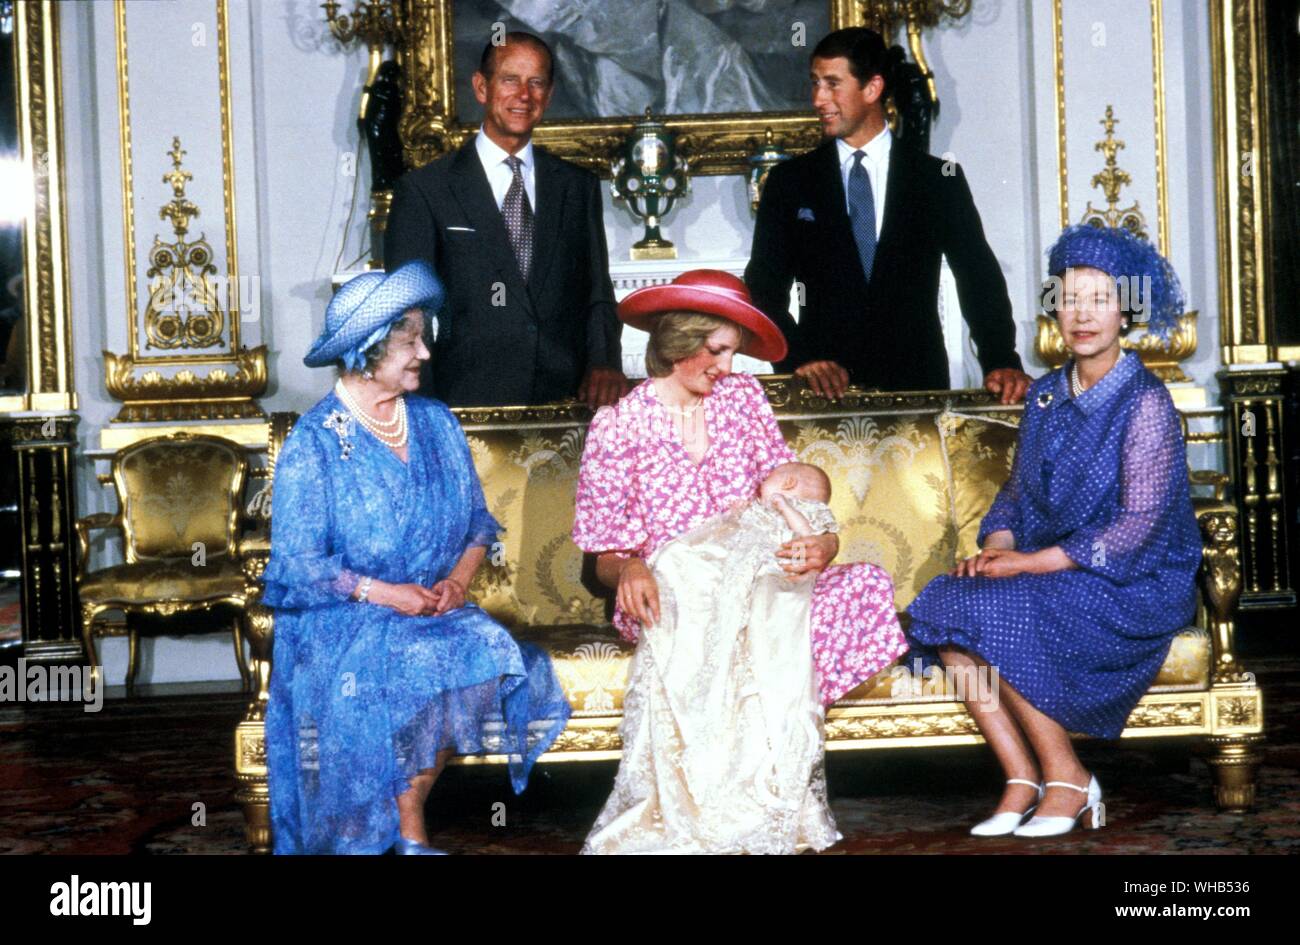 Christening of the first son, William, of Prince Charles and 4 August 1982 - Princess of Wales (Lady Diana Spencer) 29 July 1981 - Buckingham Palace. Diana is flanked by Queen Elizabeth the Queen Mother (grandmother to Prince Charles and mother to Queen Elizabeth II) and Queen Elizabeth II (mother of Prince Charles and mother-in-law to Diana). In the photo behind are PrincePhilip the Duke of Edinburgh, and Prince Charles, the Prince of Wales.. Stock Photo